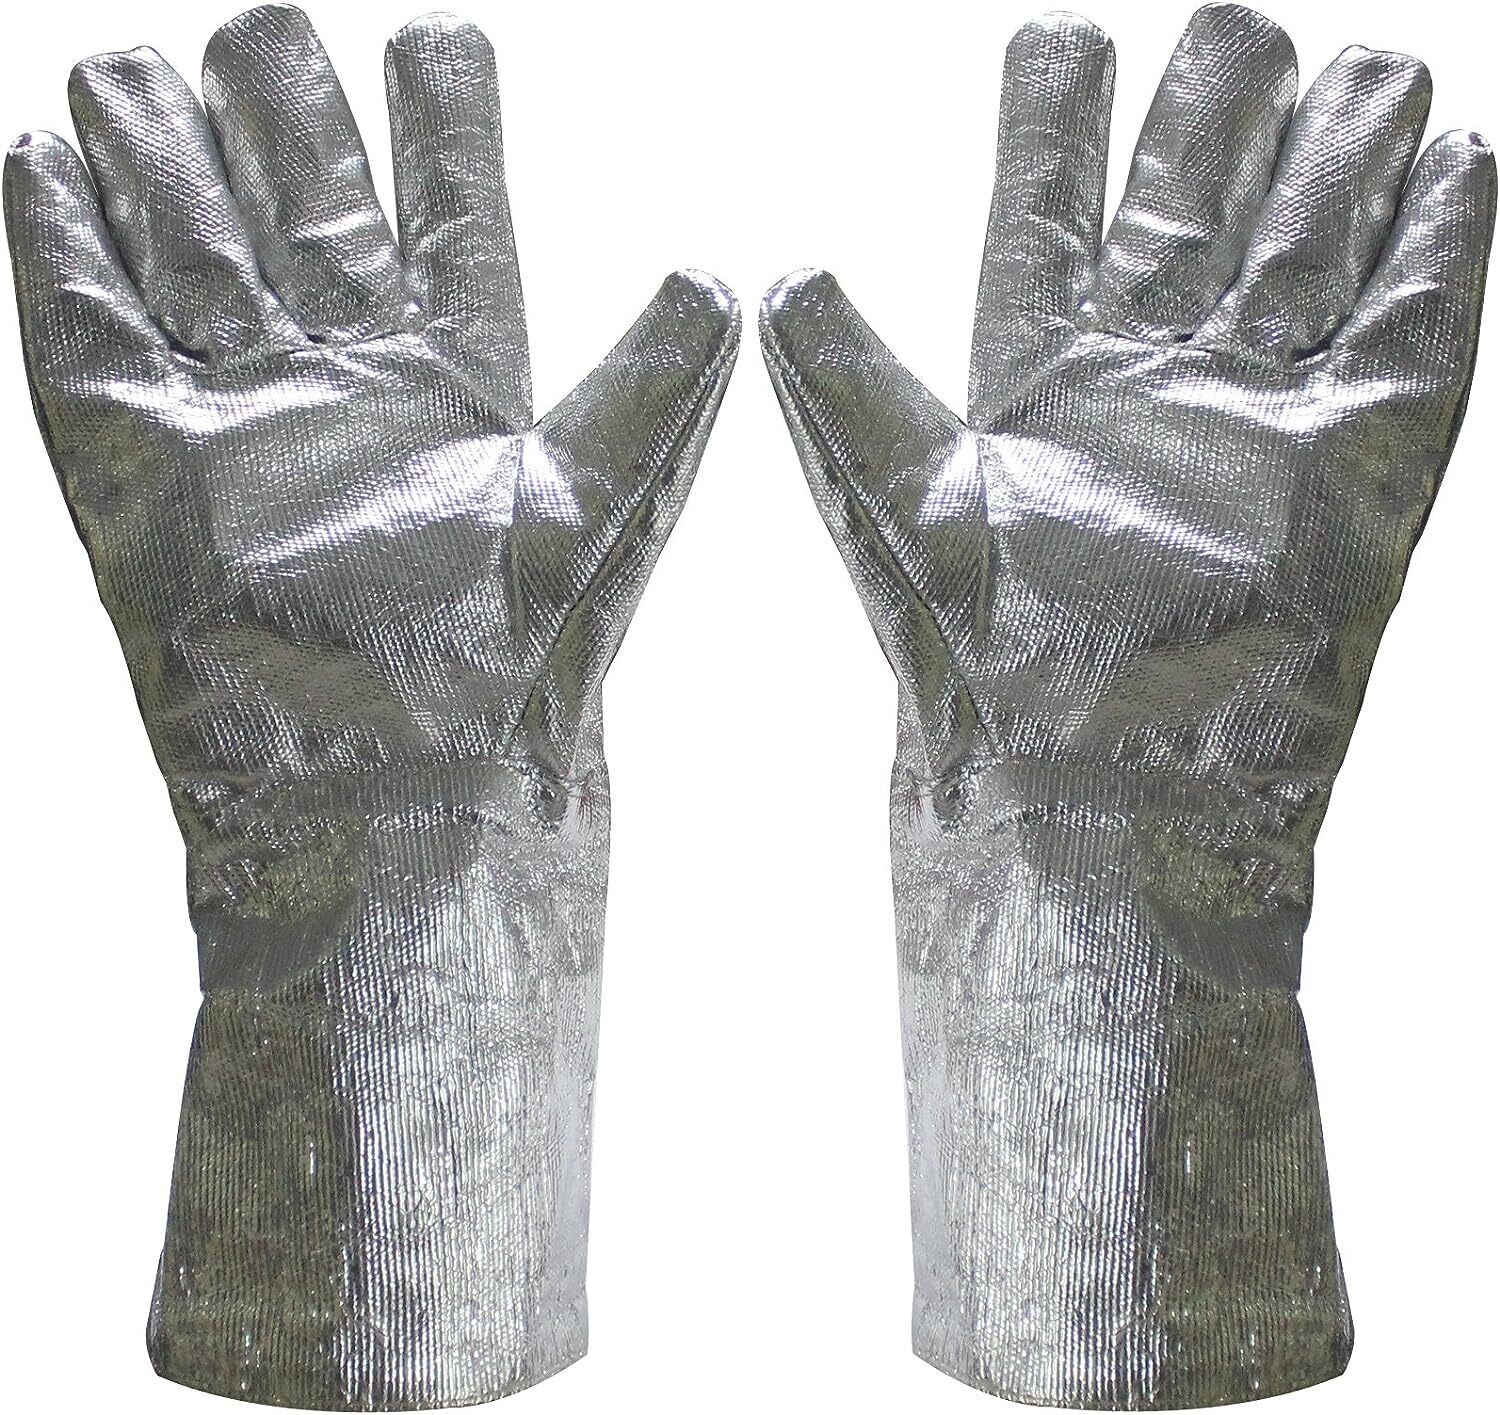 Aluminized Safety Melting Furnace Gloves Refining Metal Glass Heat Resistant. Fire Gloves FG01